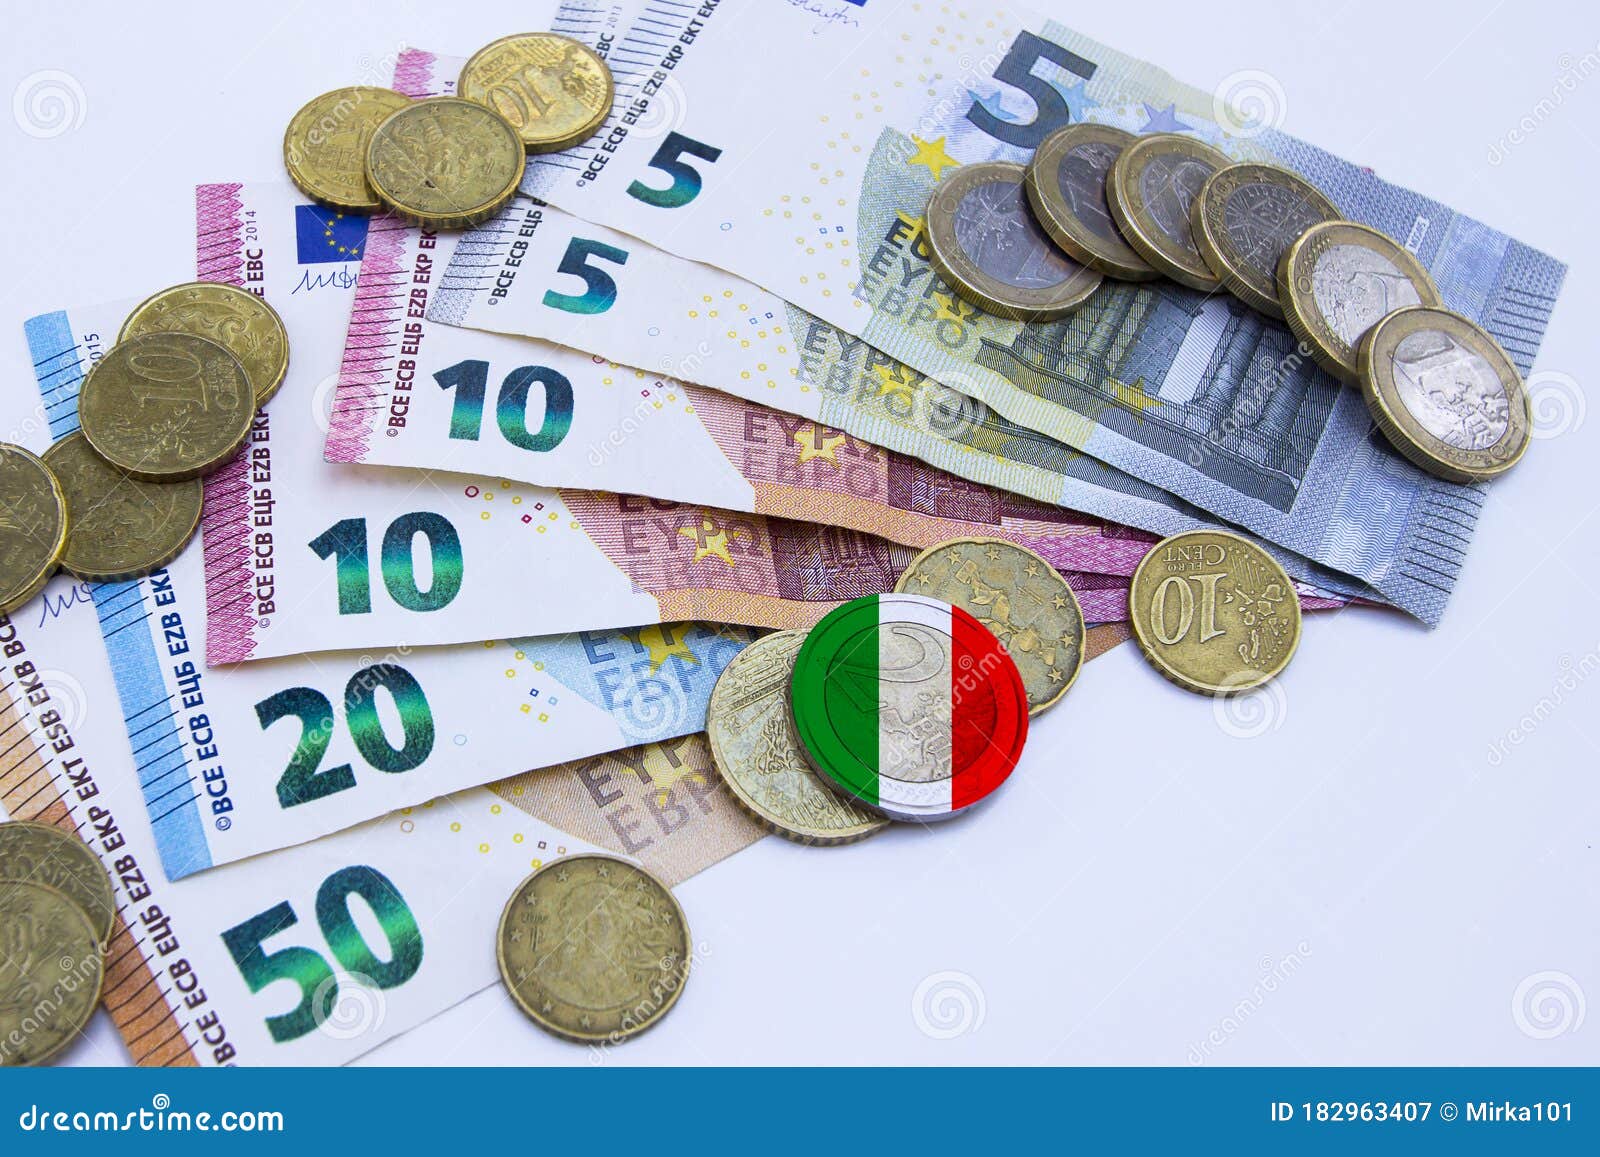 variety-of-italian-banknotes-and-coins-with-italian-flag-stock-image